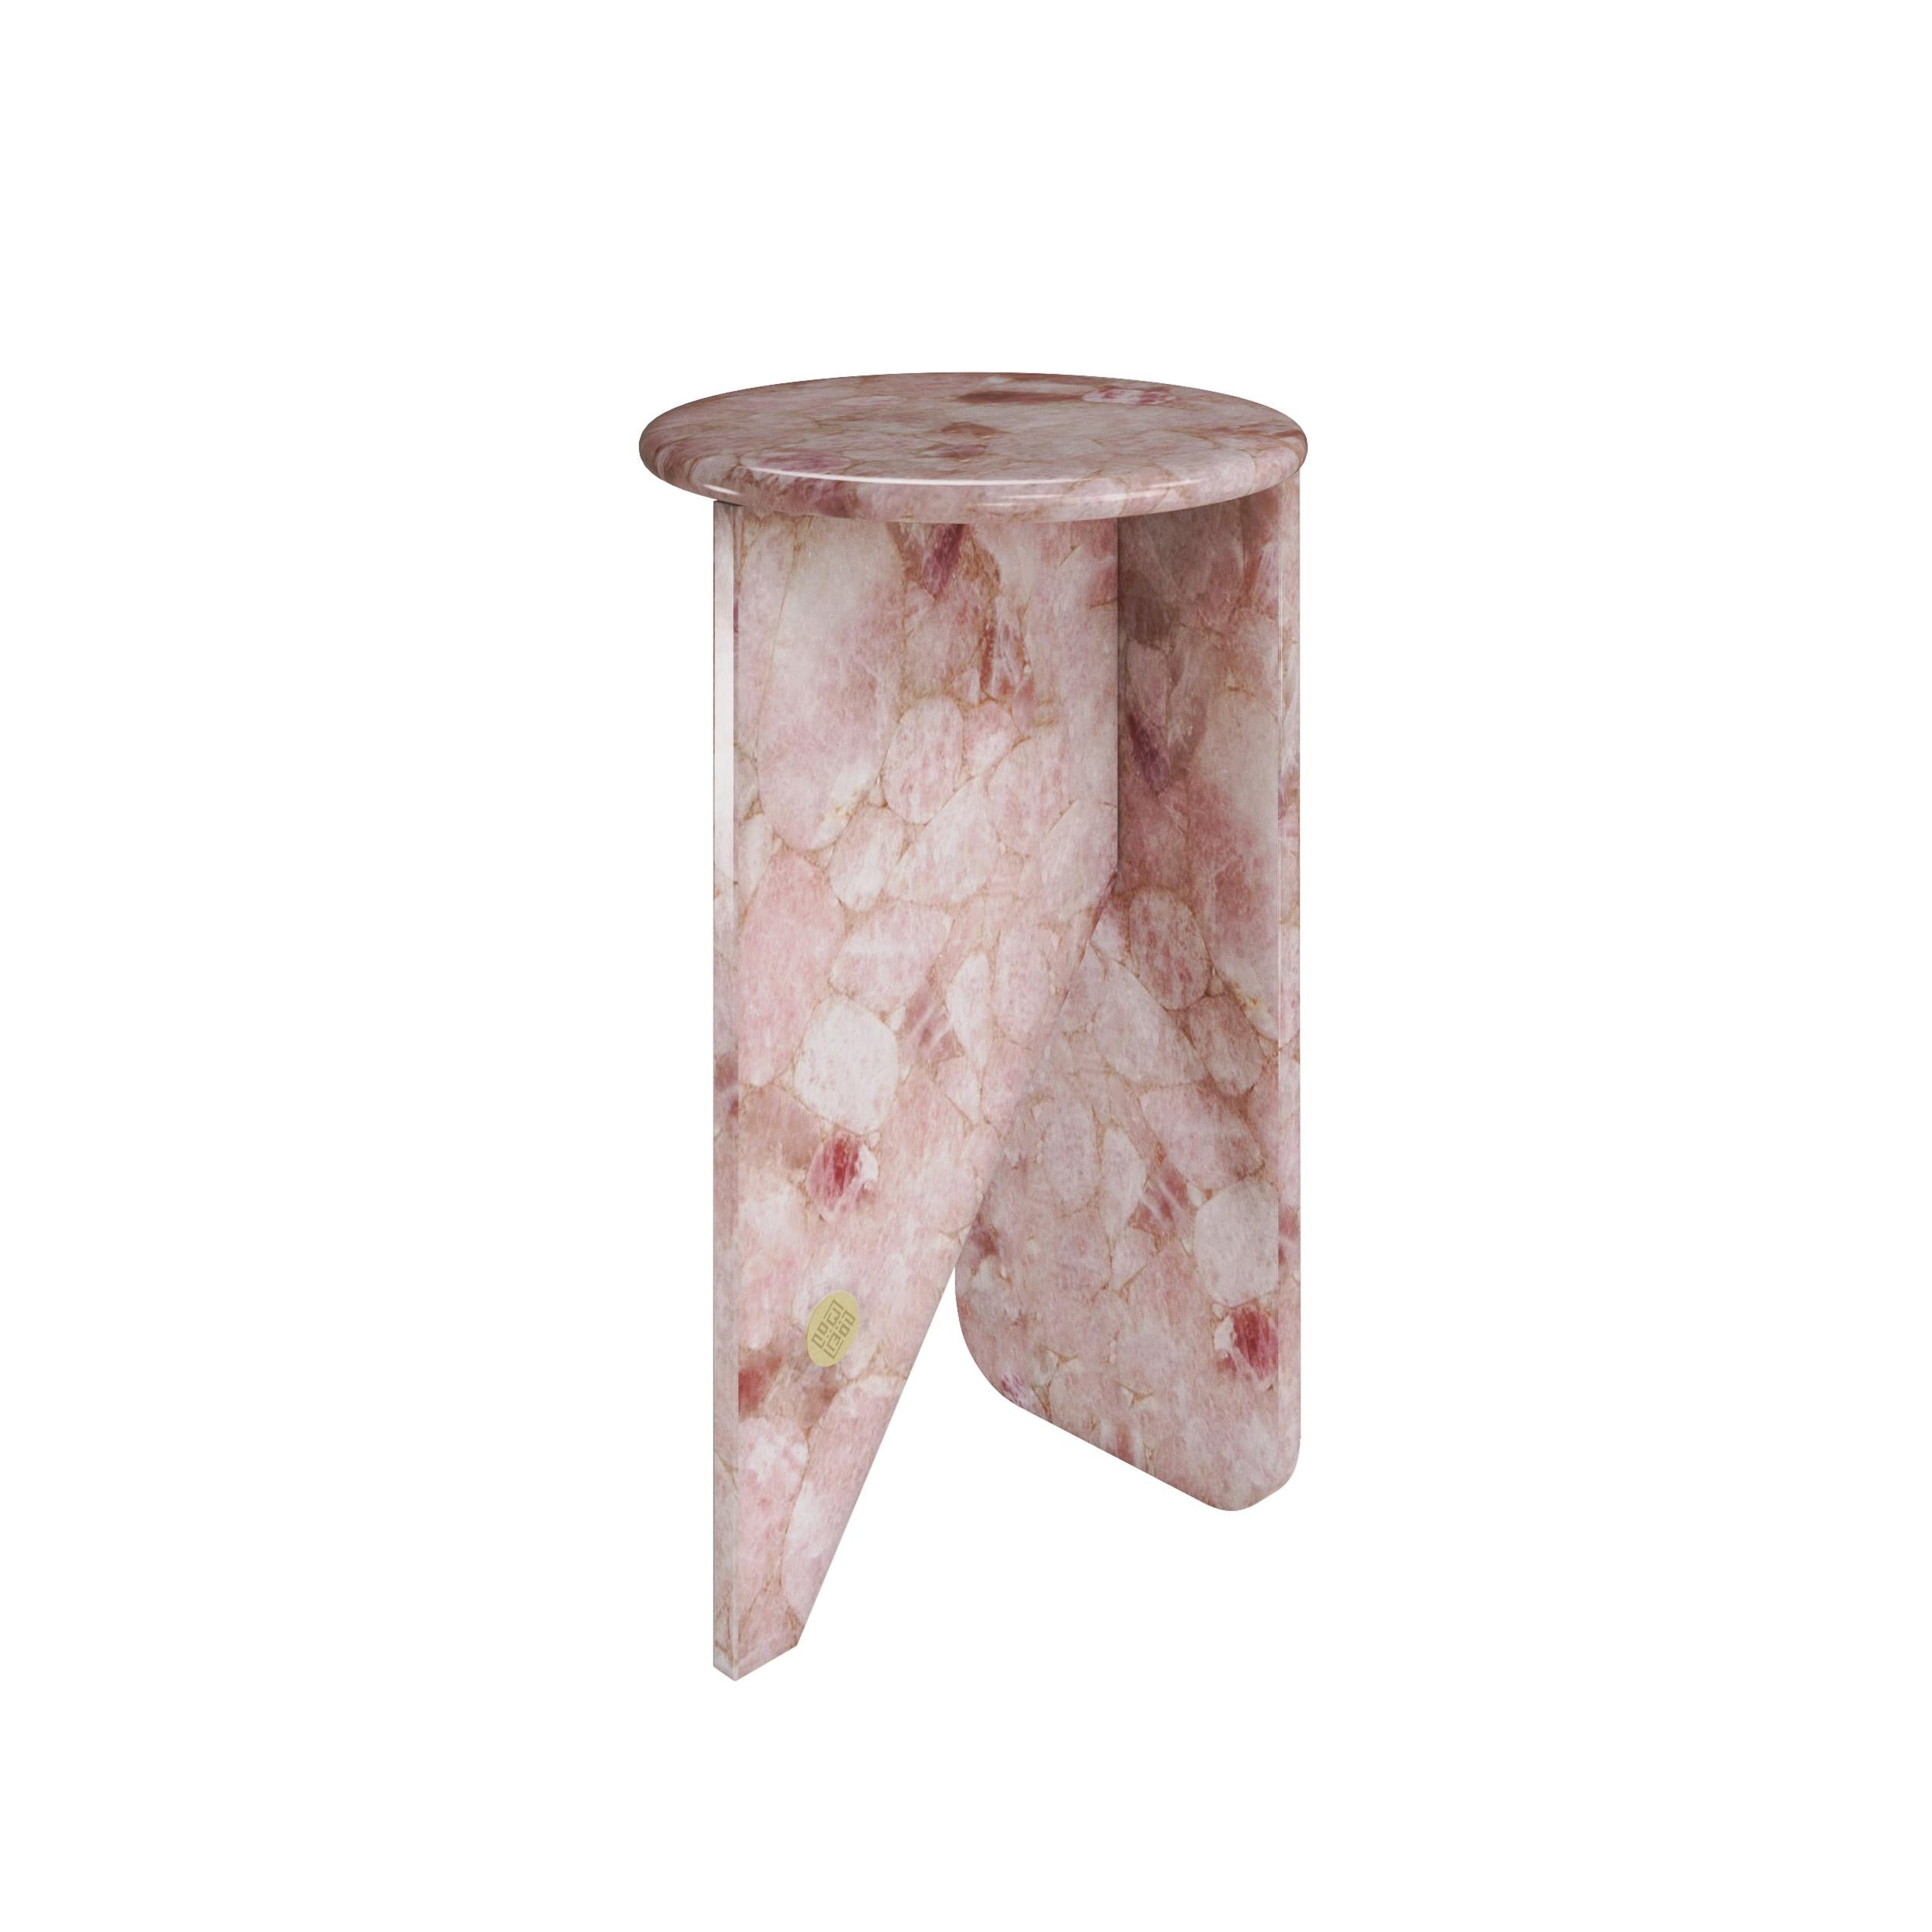 Quartz Eli baby love side table hand sculpted by Element & Co.
Dimensions: 35 Ø x 60 cm
Materials: Rose quartz, precious stone 

Elisabeth Love is totally sculpted in rose quartz. Its curved lines and circular shape turn this piece into a